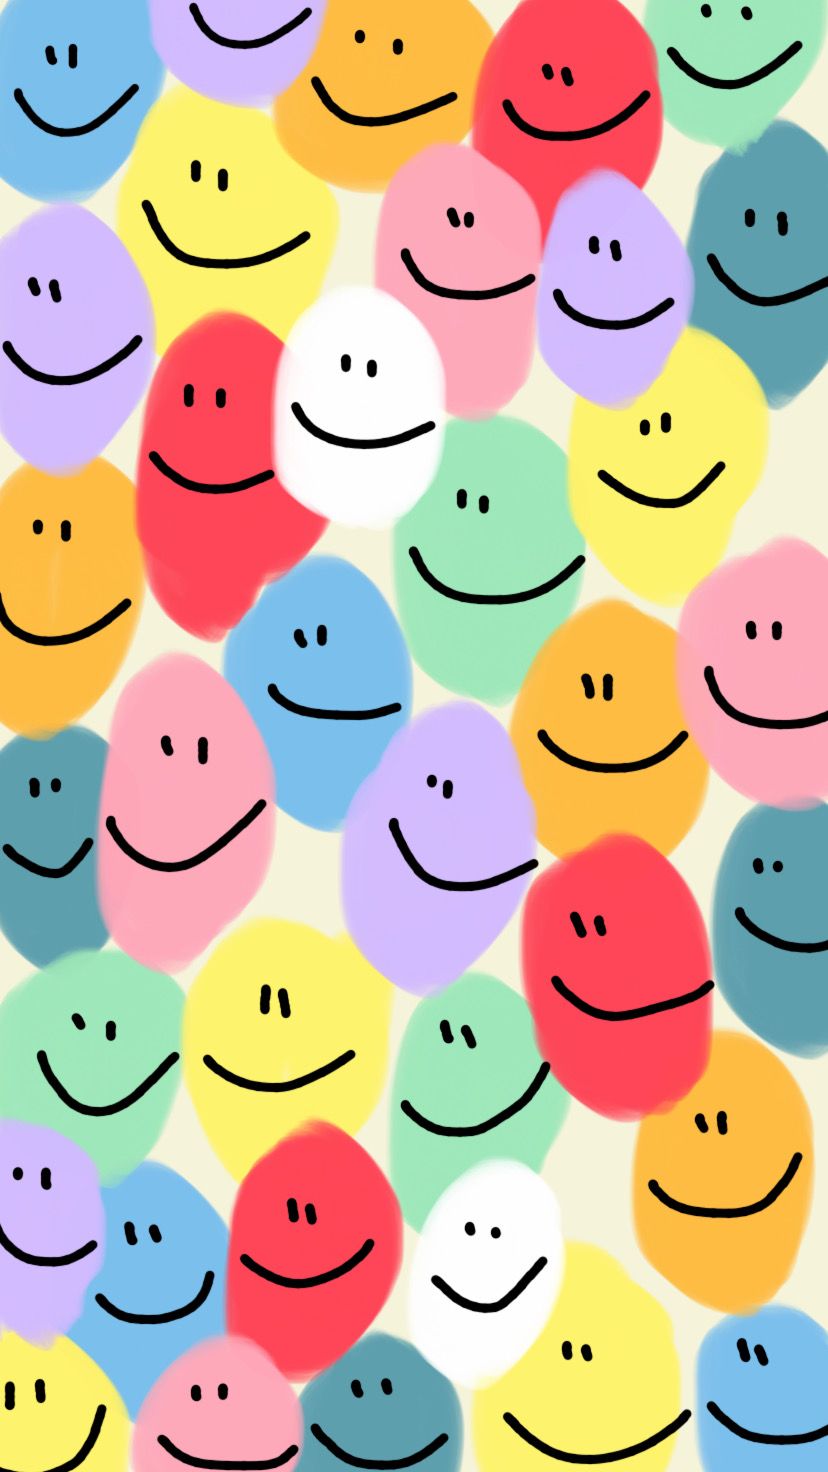 Smiley face wallpaper cute patterns wallpaper art collage wall iphone background wallpaper